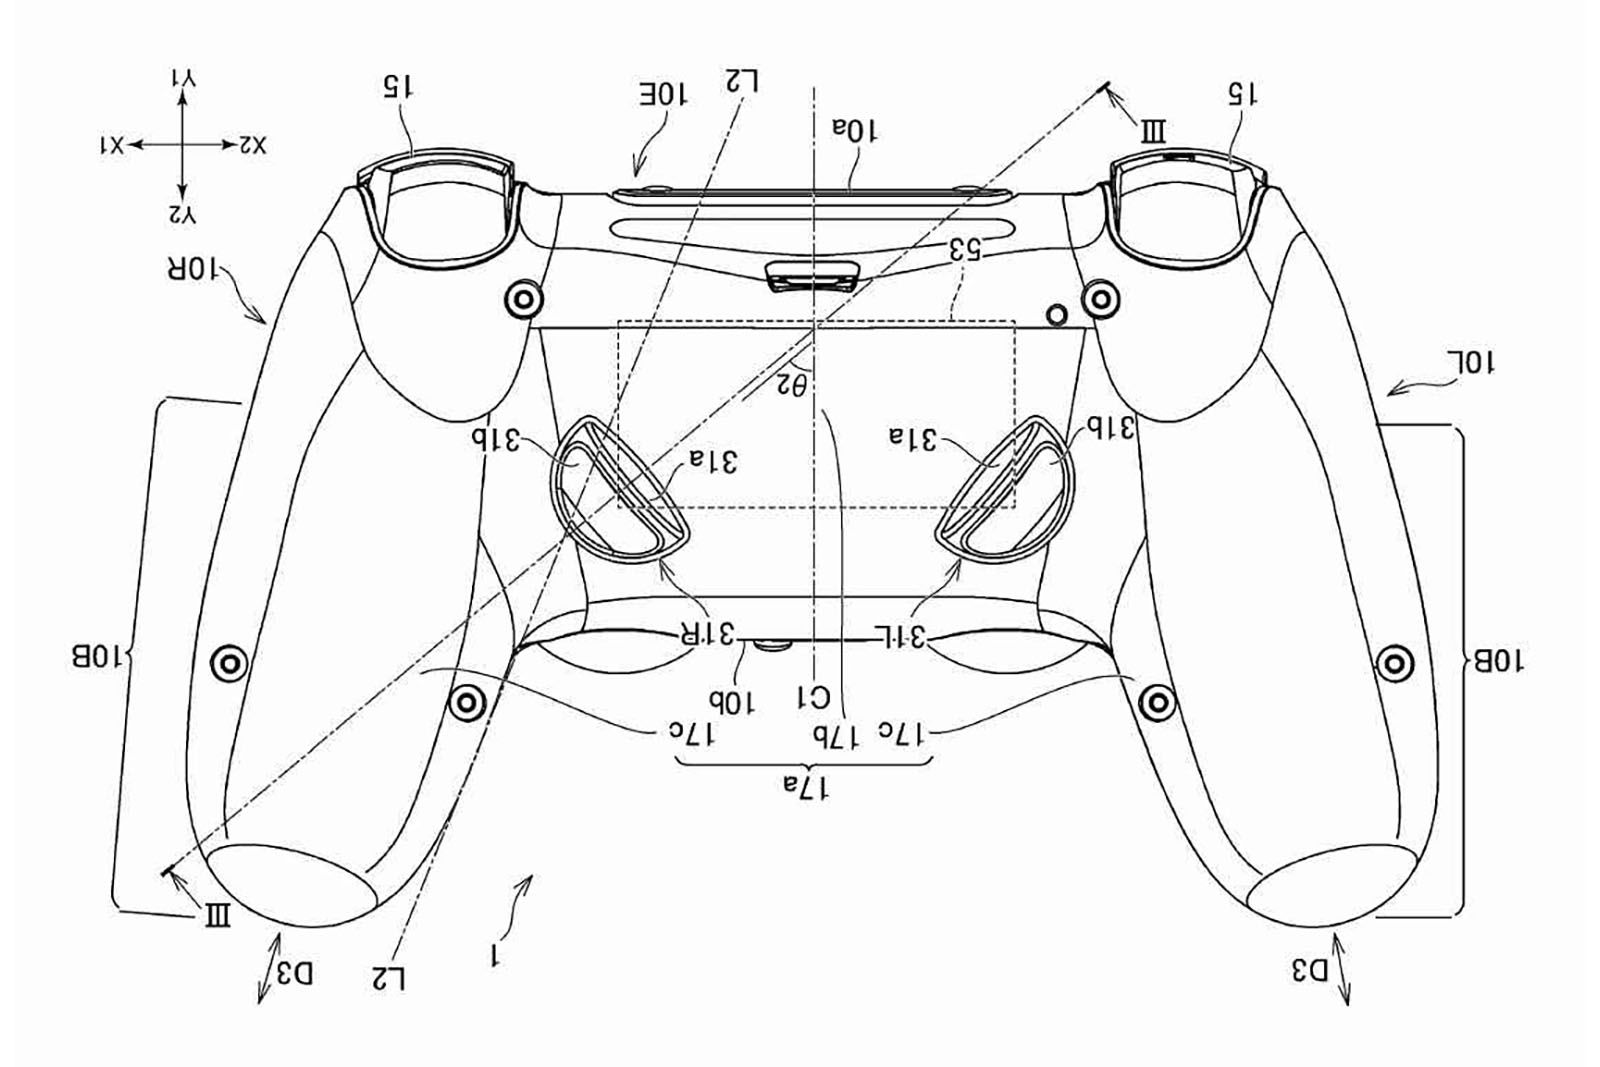 PS5 controller shown in patent gains two rear buttons but has one major thing missing image 3